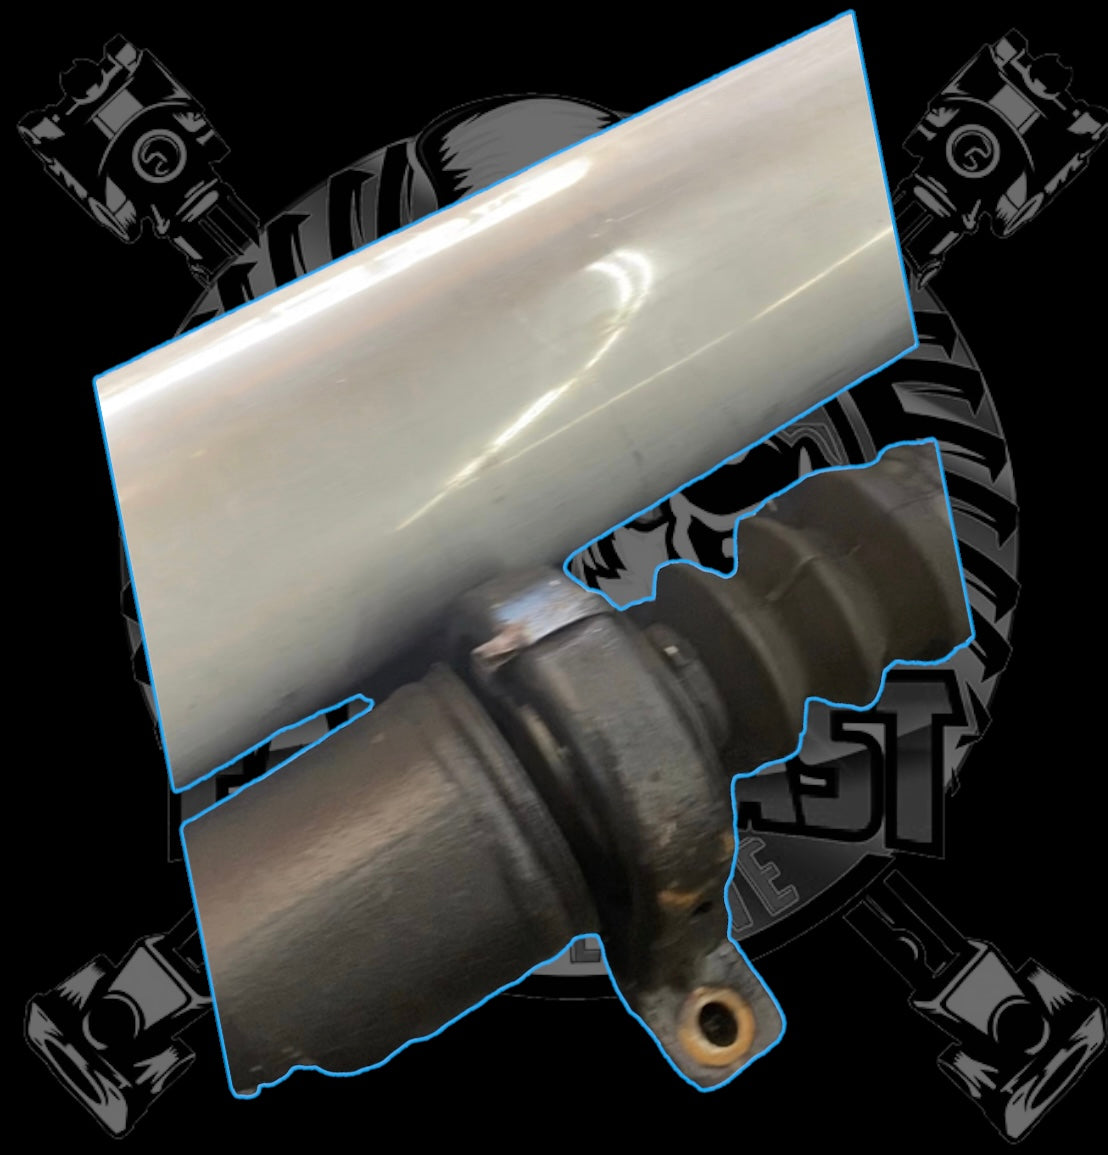 2003-2007 Ford F350 SUPER DUTY 7.3L, 6.8L, 6.0L and 5.4L AWD/4WD Automatic/Manual Custom 1 Piece Aluminum Driveshaft Replaces 2 Piece Driveshaft with Hanger Bearing